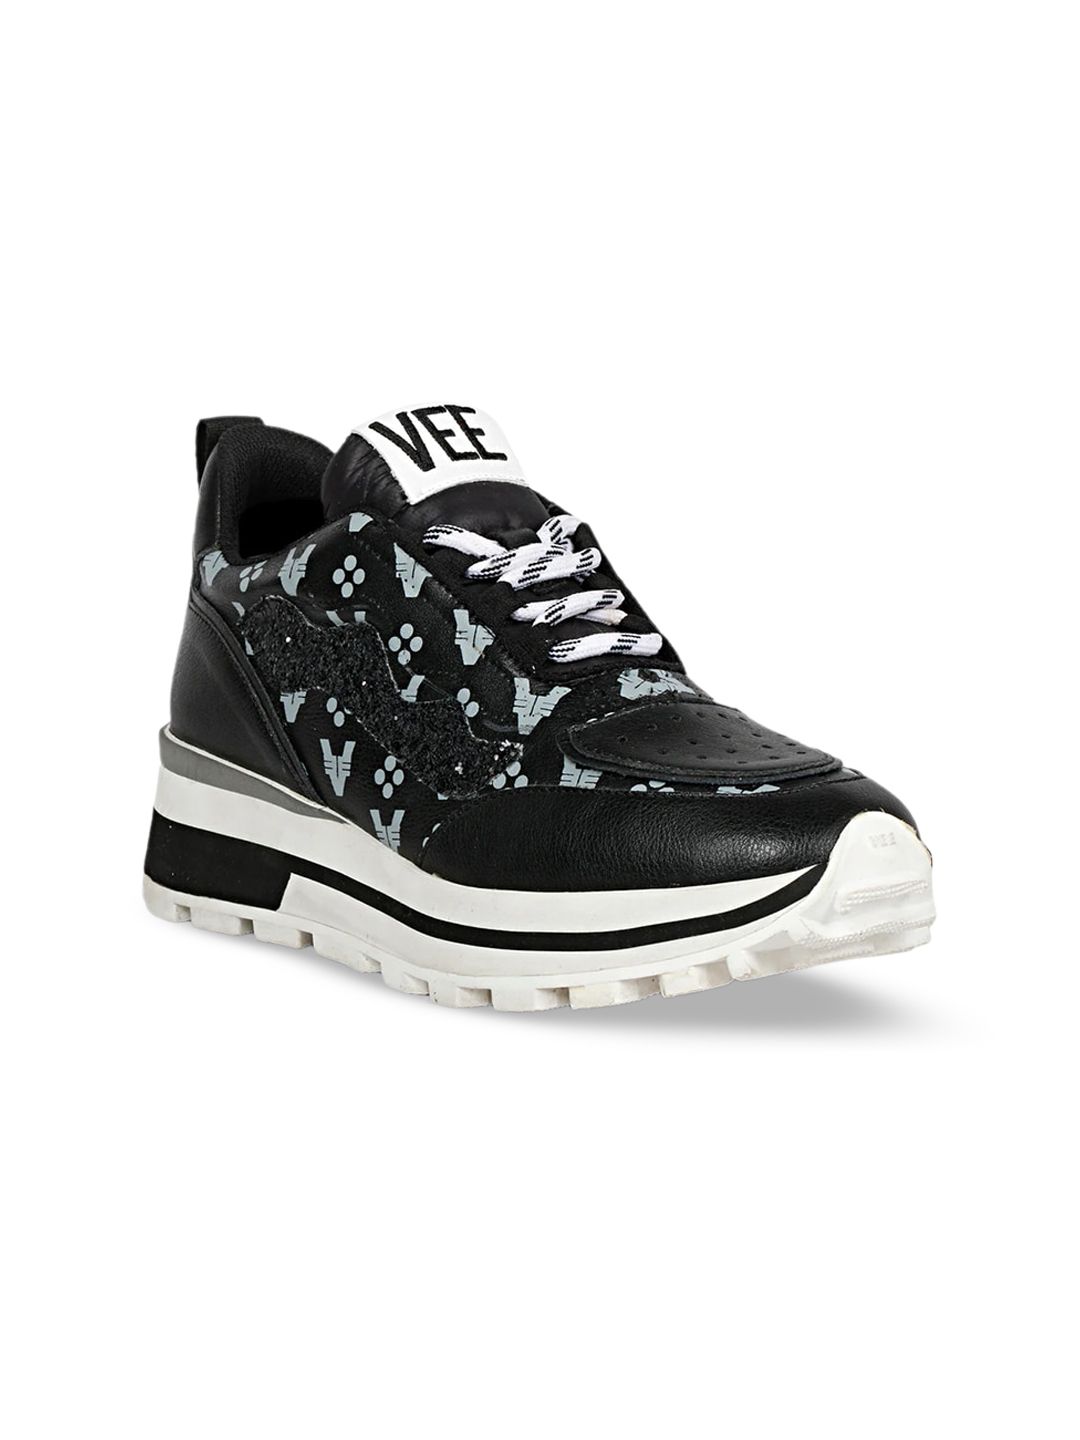 Saint G Women Printed Leather Contrast Sole Sneakers Price in India